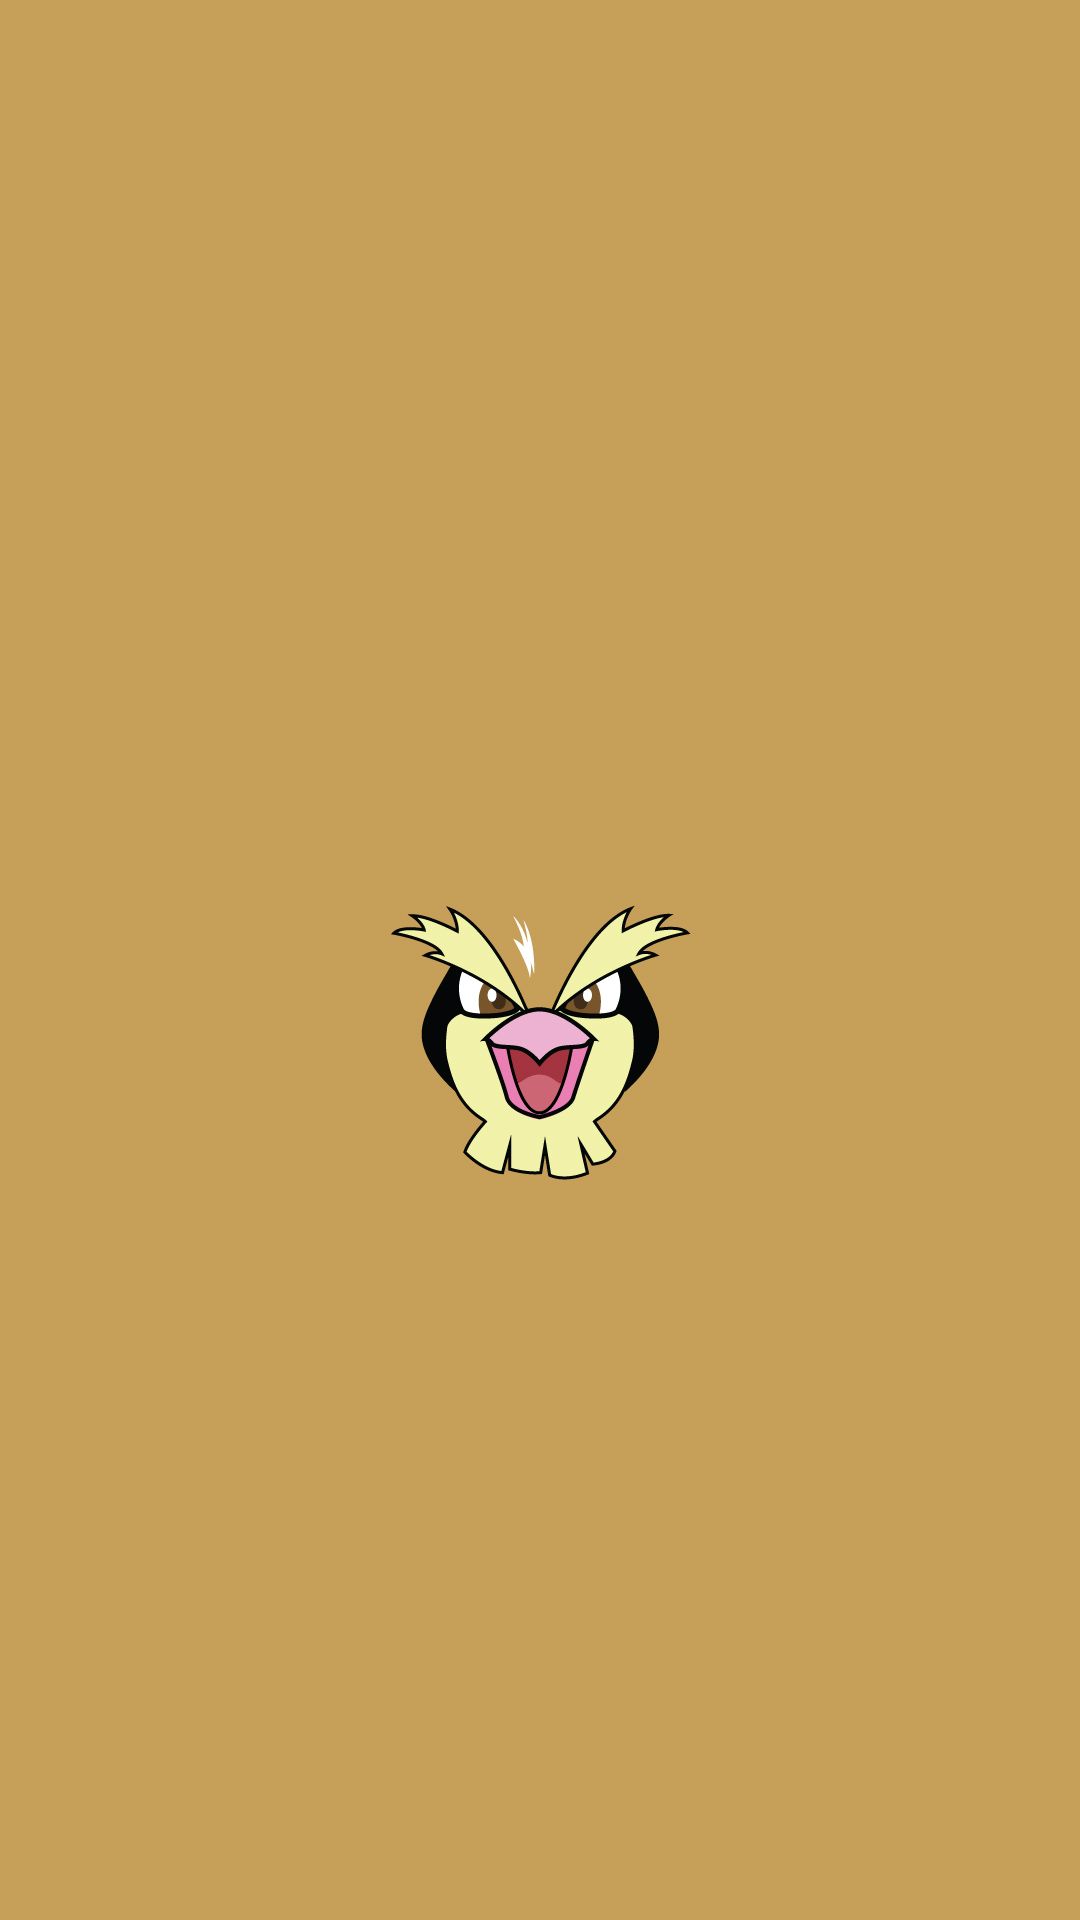 Pidgey Pokemon Go Character Android Wallpaper free download